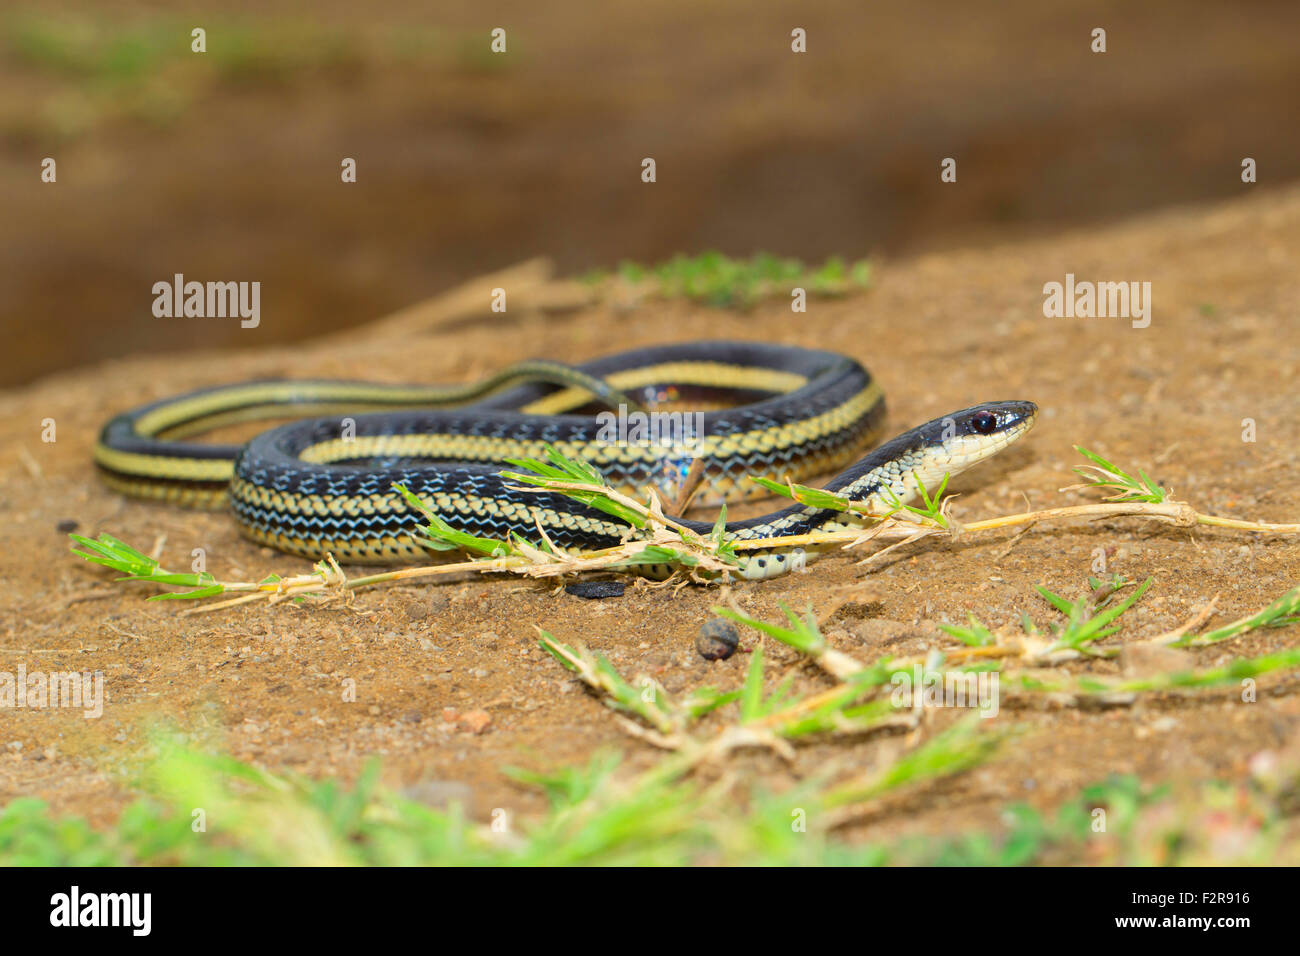 Thamnosophis lateralis (serpent), Southern Highlands, Madagascar Banque D'Images